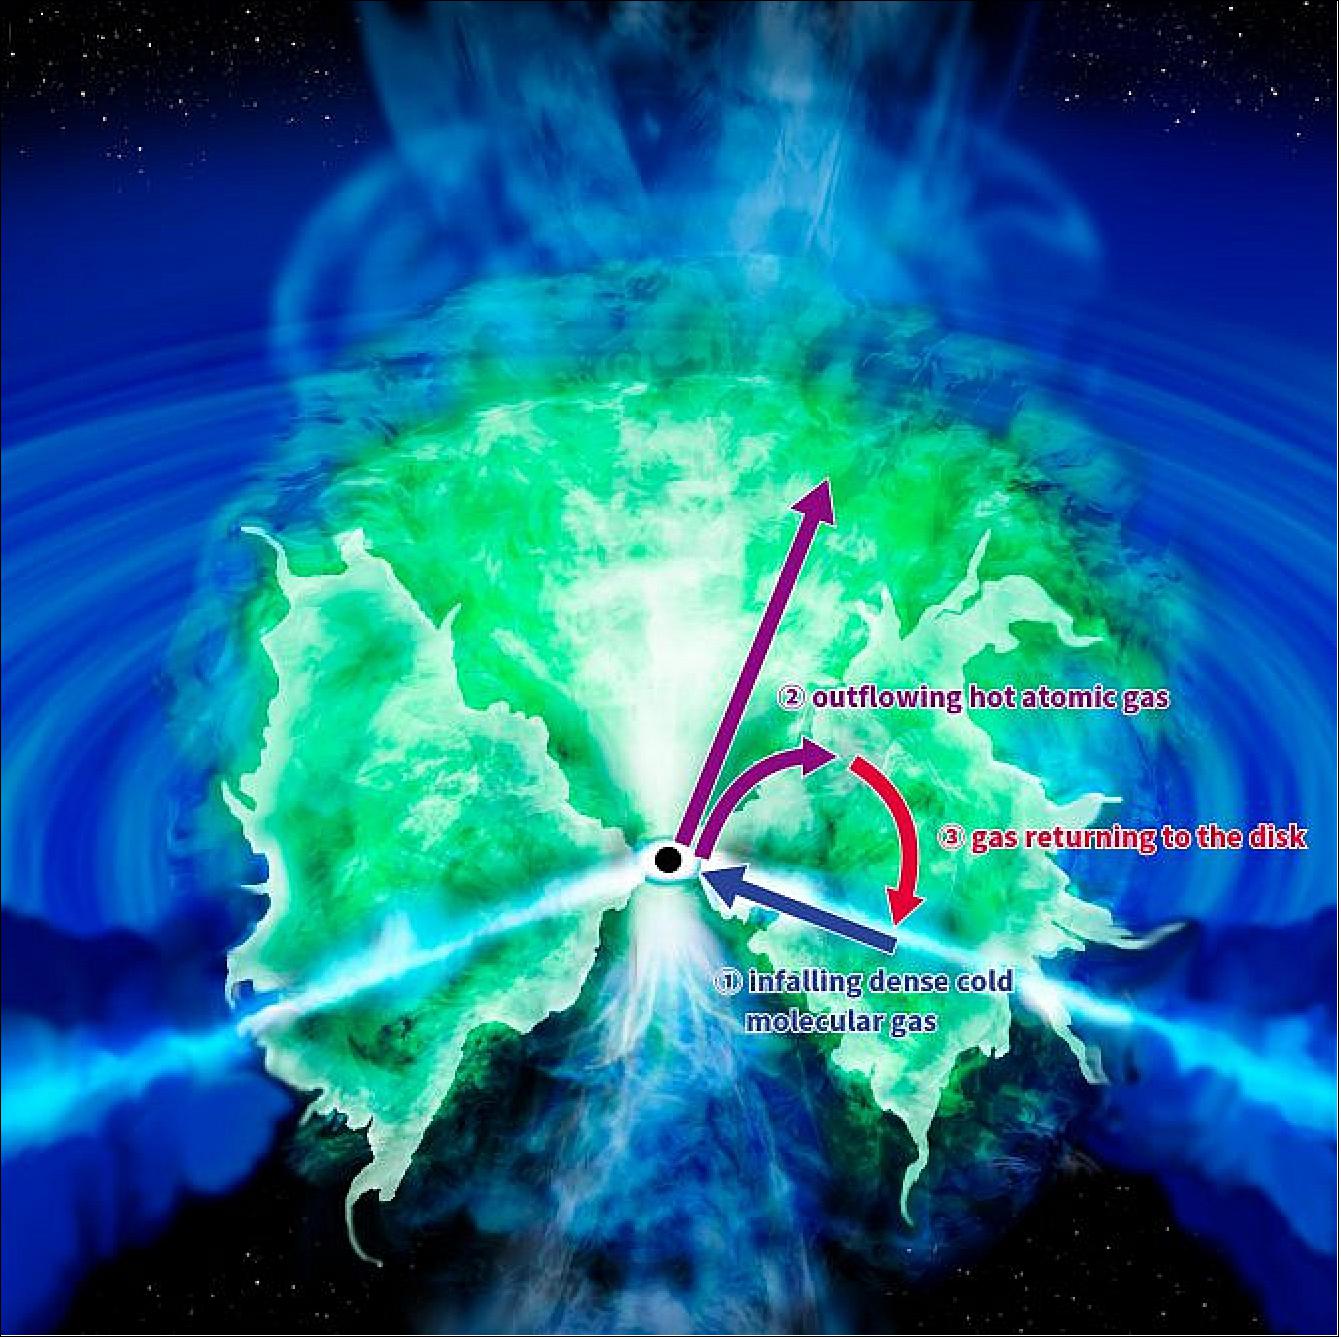 Figure 6: Artist's impression of the gas motion around the supermassive black hole in the center of the Circinus Galaxy. The three gaseous components form the long-theorized "donut" structure: (1) a disk of infalling dense cold molecular gas, (2) outflowing hot atomic gas, and (3) gas returning to the disk (image credit: NAOJ)